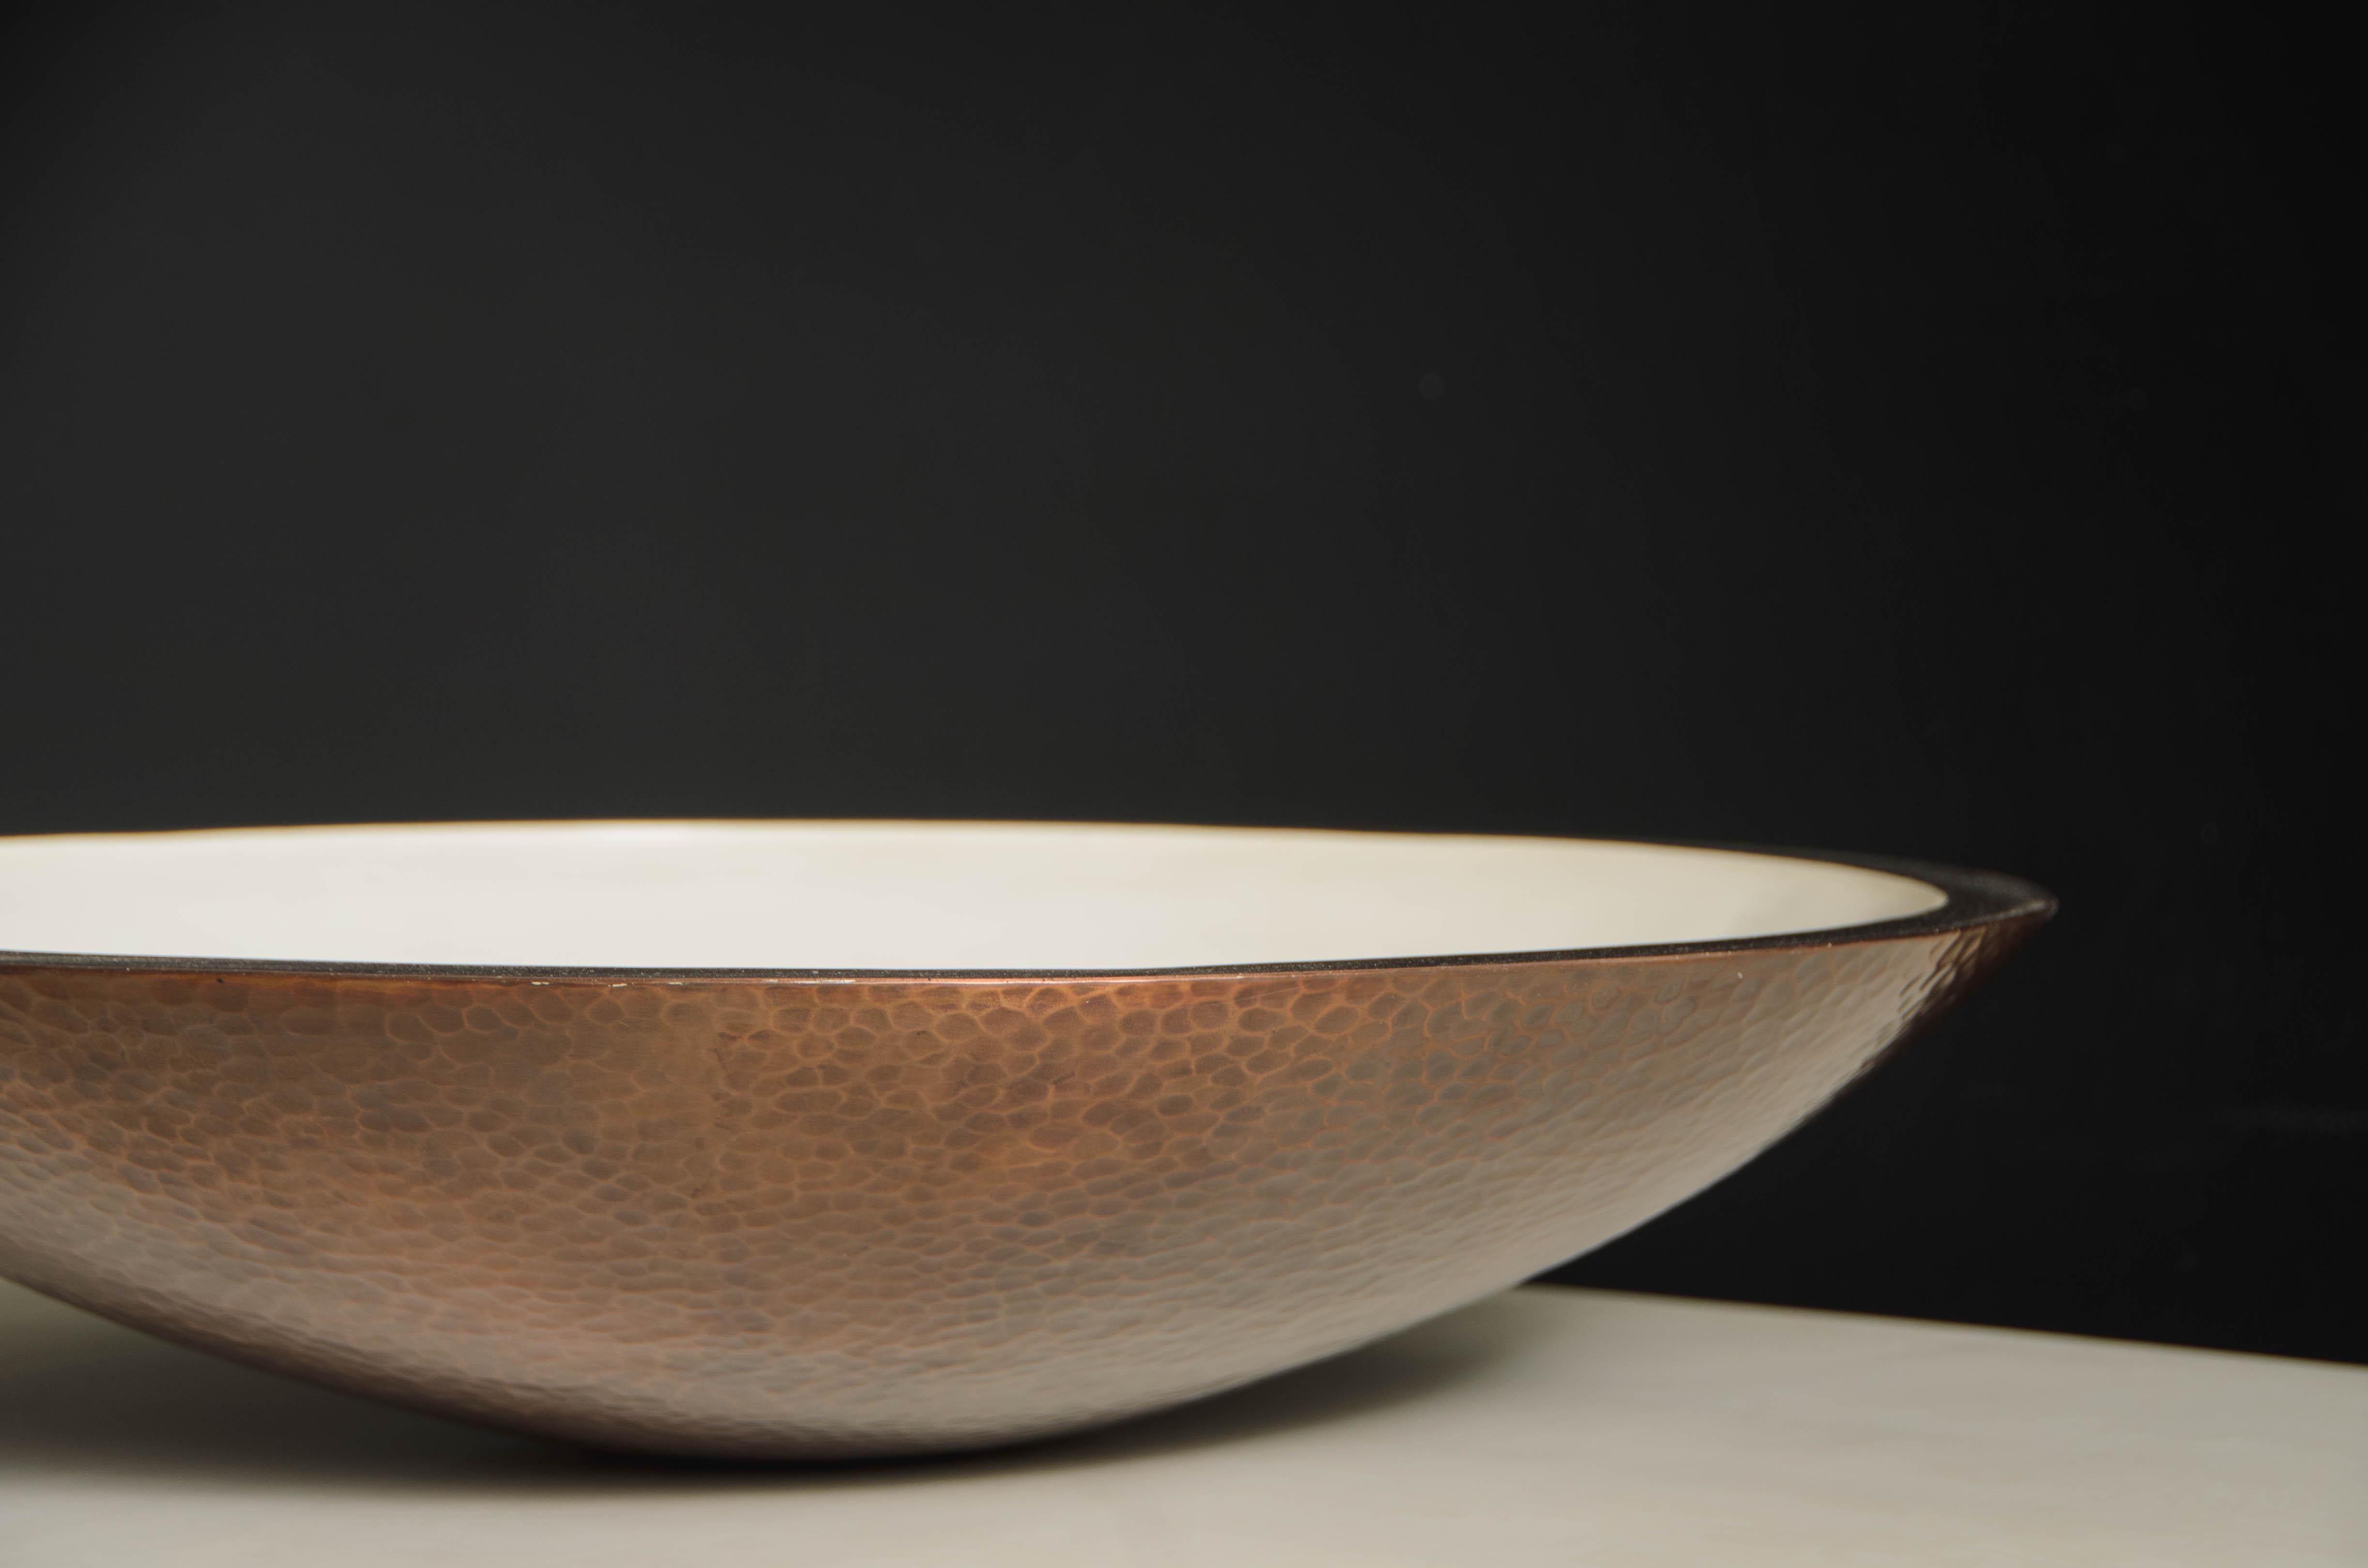 Repoussé Contemporary Shallow Bowl in Cream Lacquer and Copper by Robert Kuo For Sale